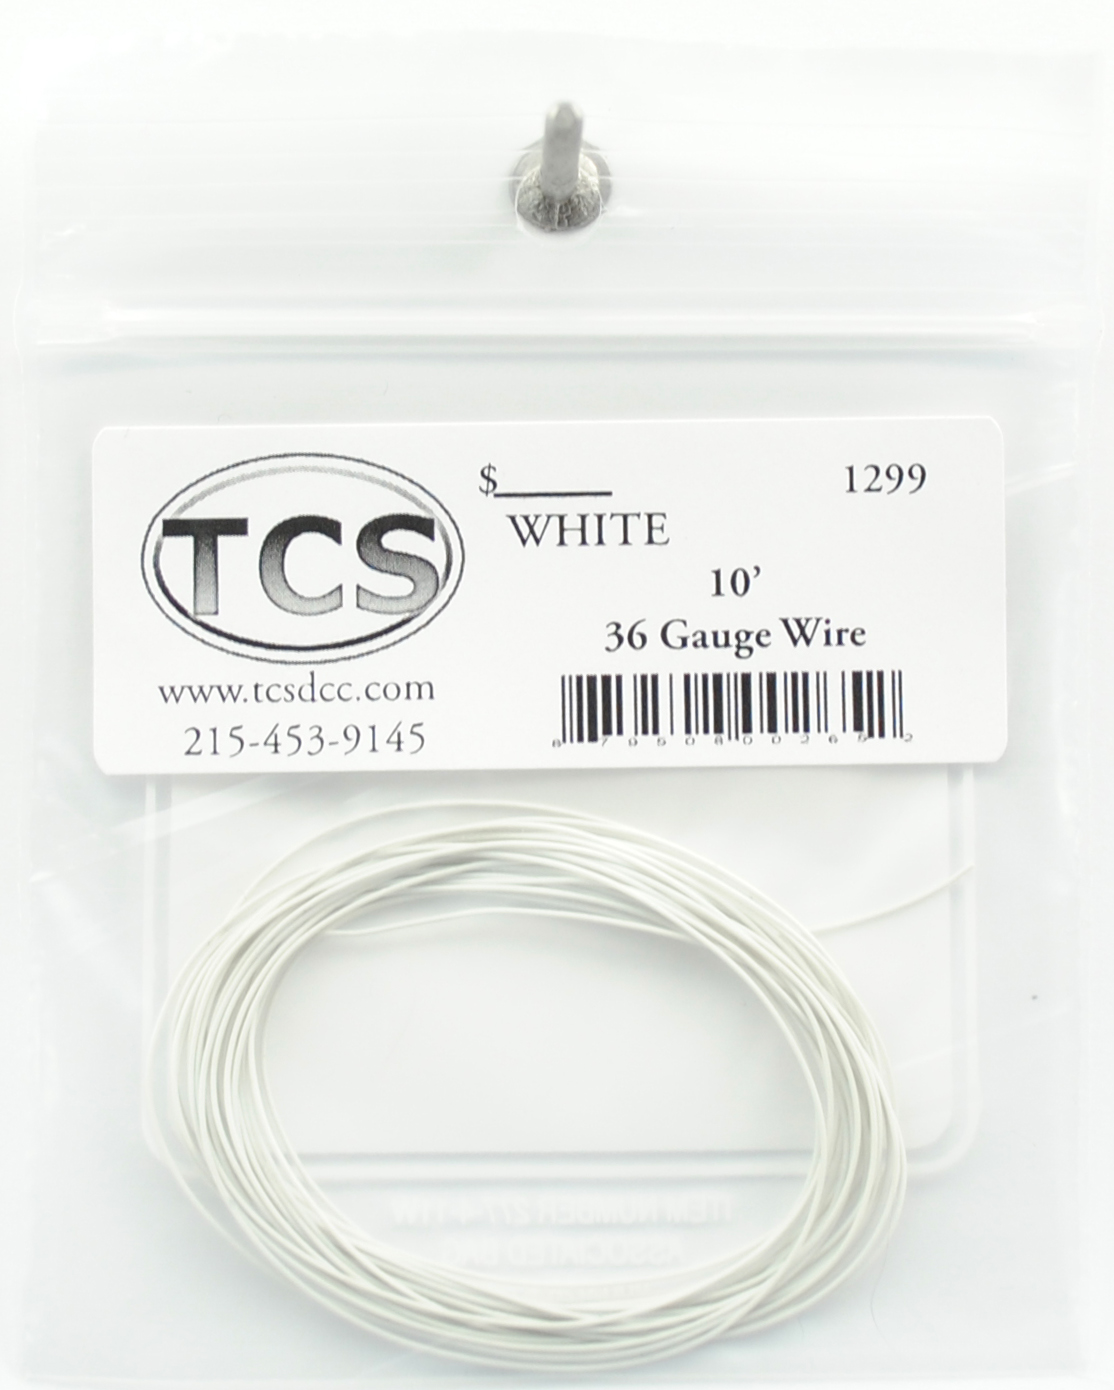 10ft 36 Gauge White Wire - Click Image to Close